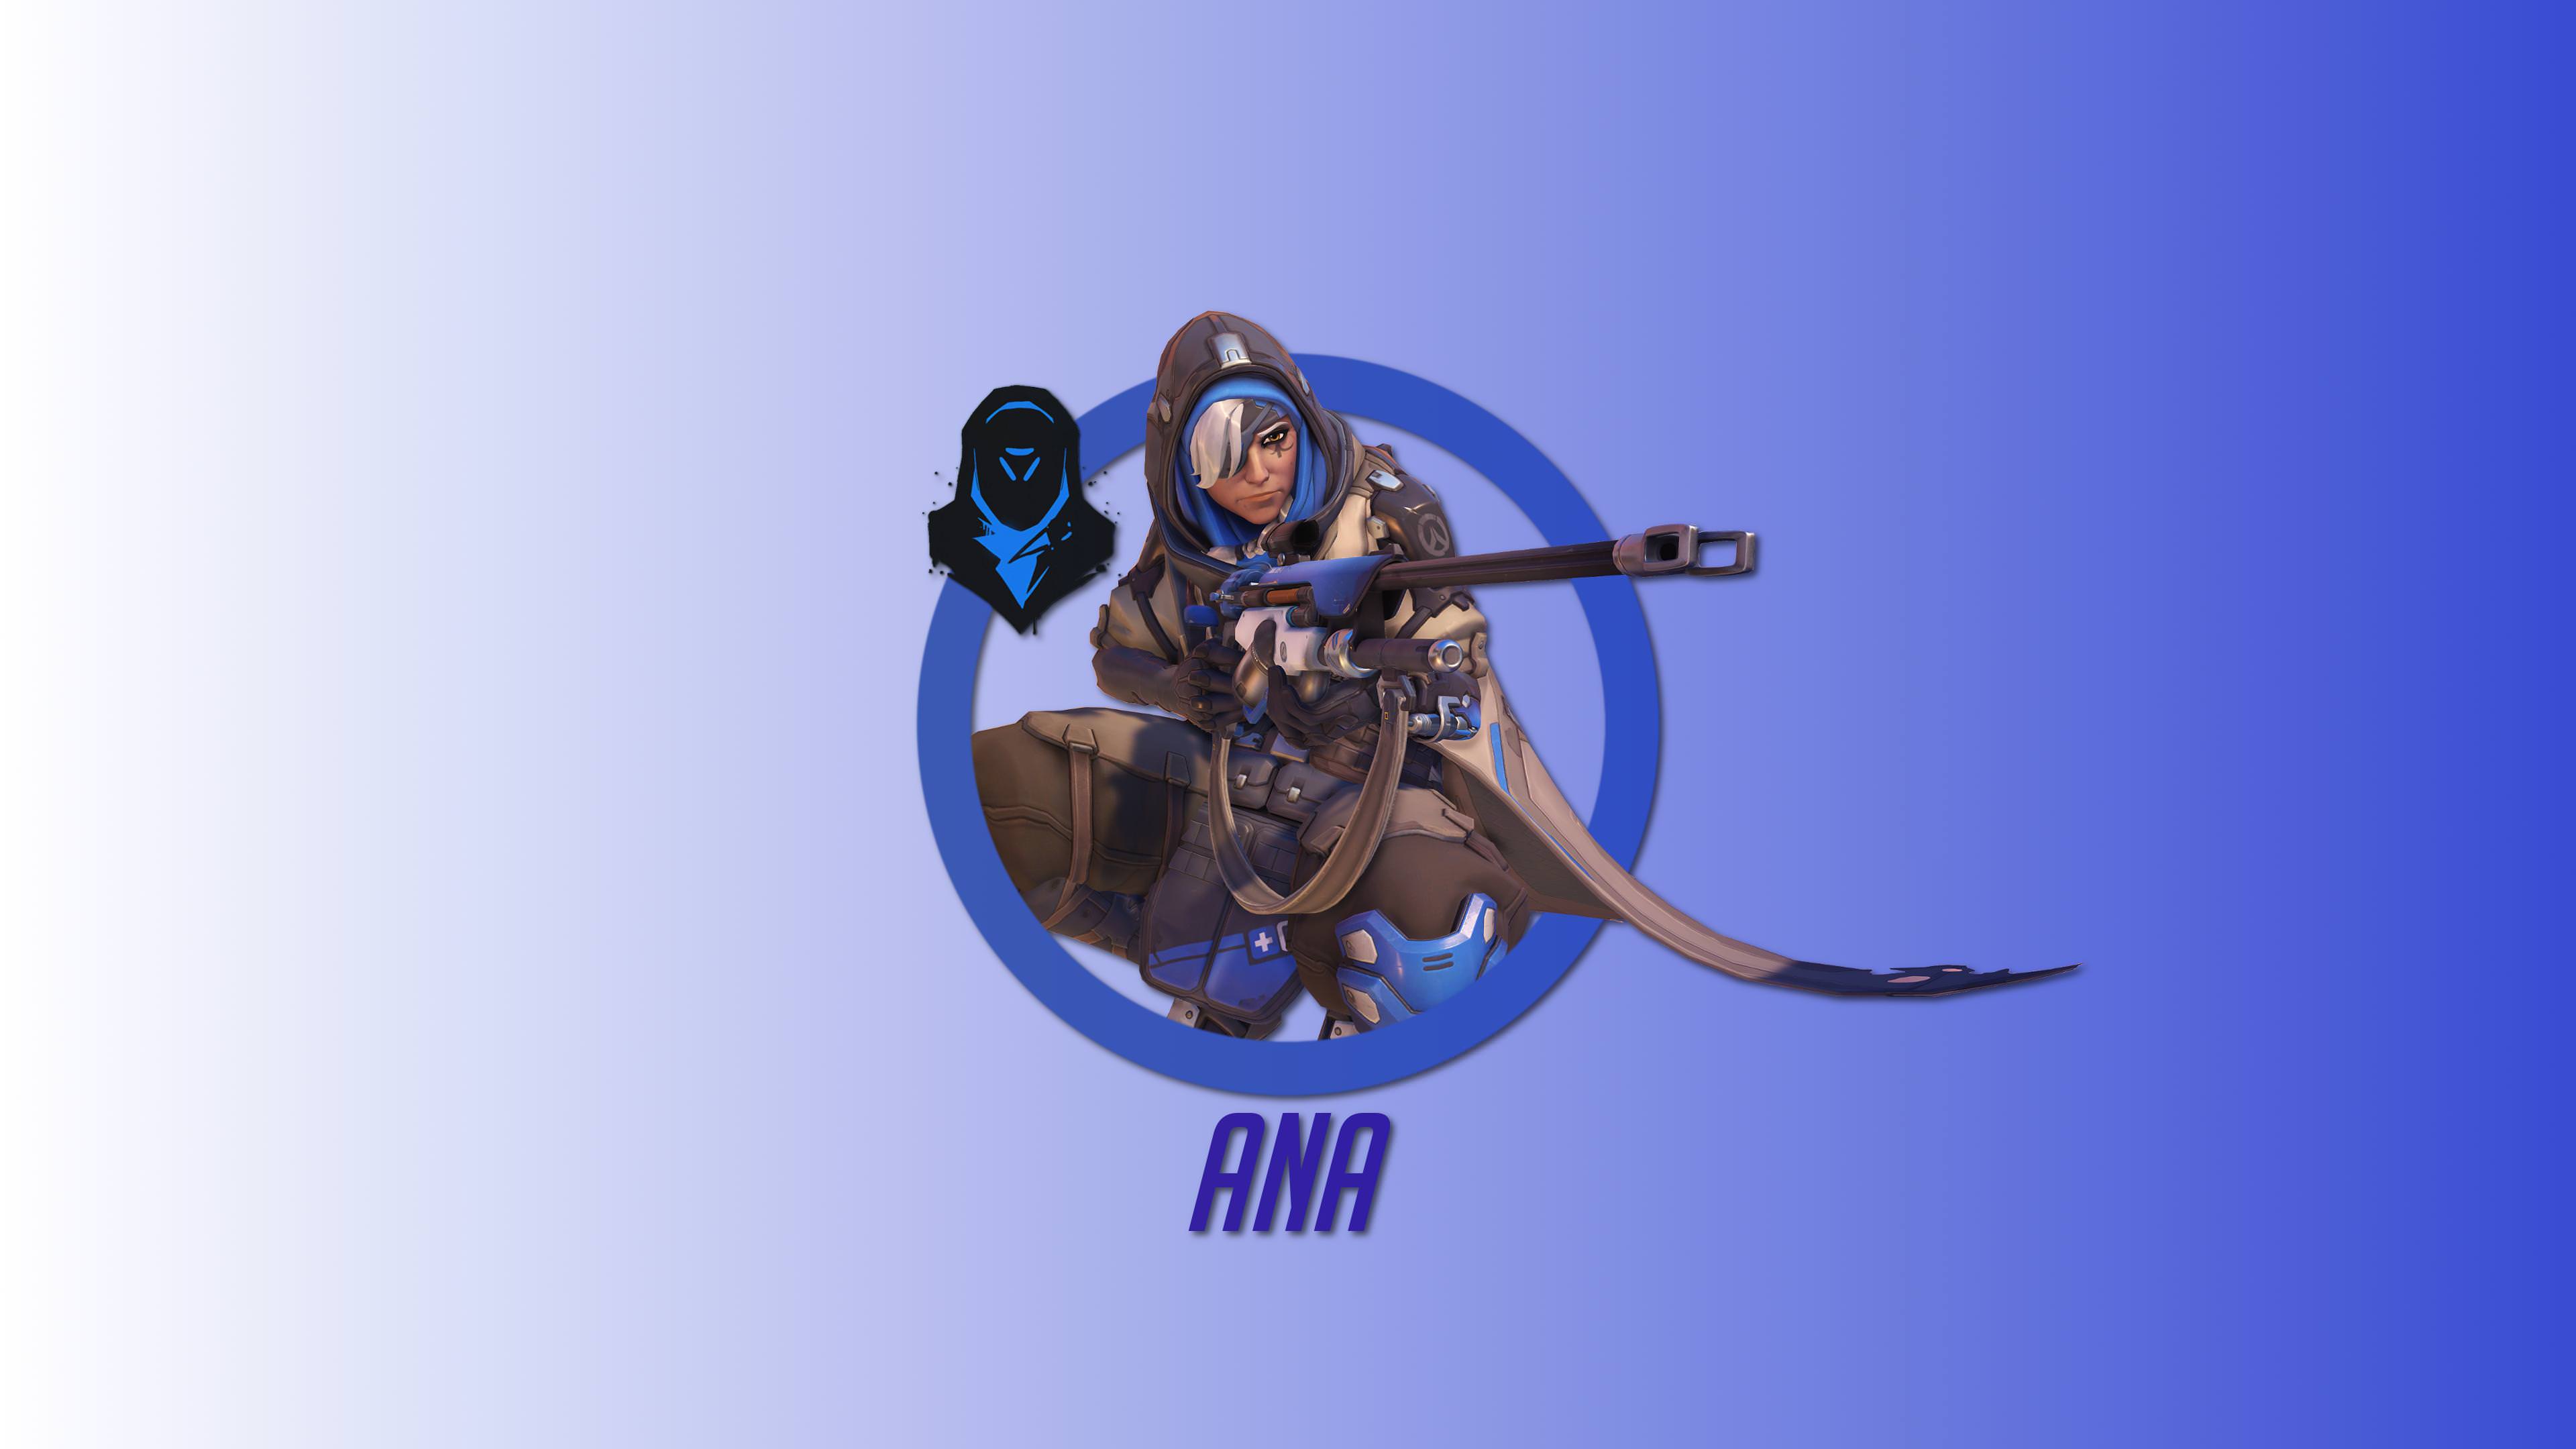 Ana Overwatch Hero Hd Games 4k Wallpapers Images Backgrounds Photos And Pictures